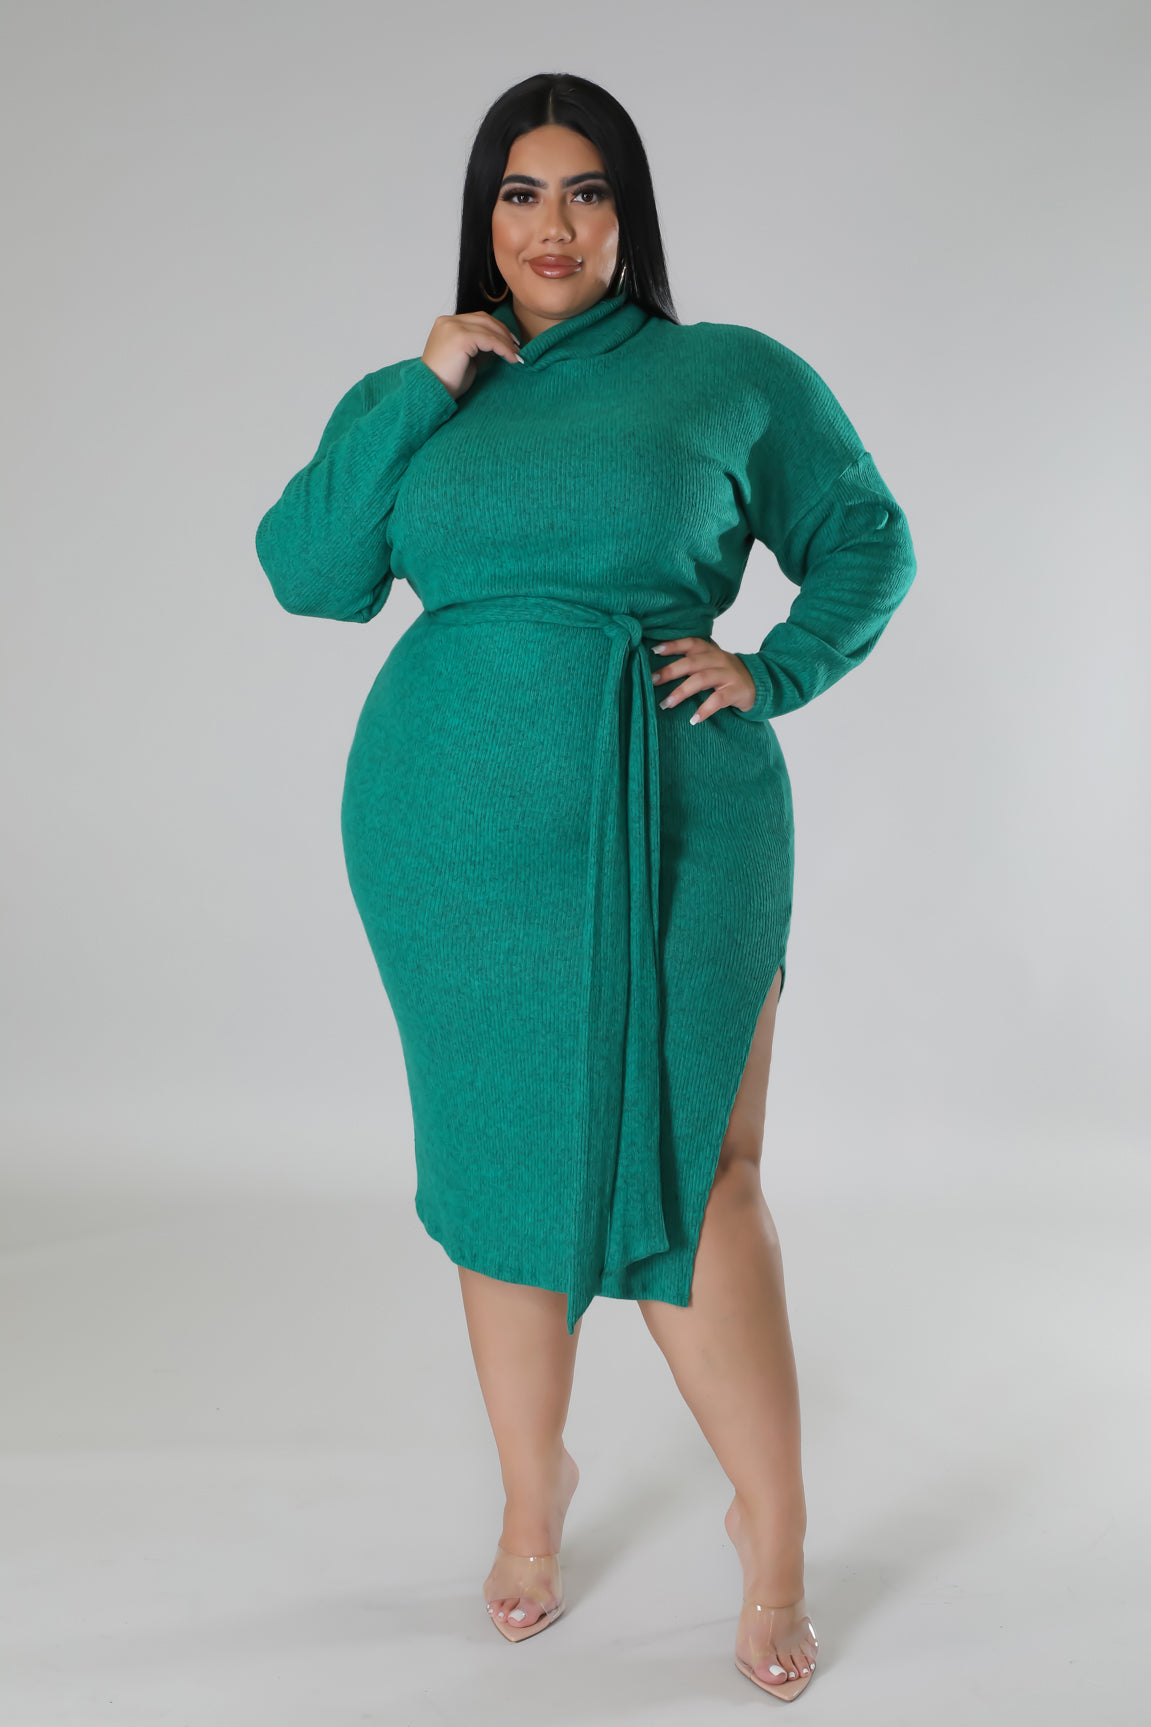 Front view of model wearing cozy knit turtle neck dress with slit